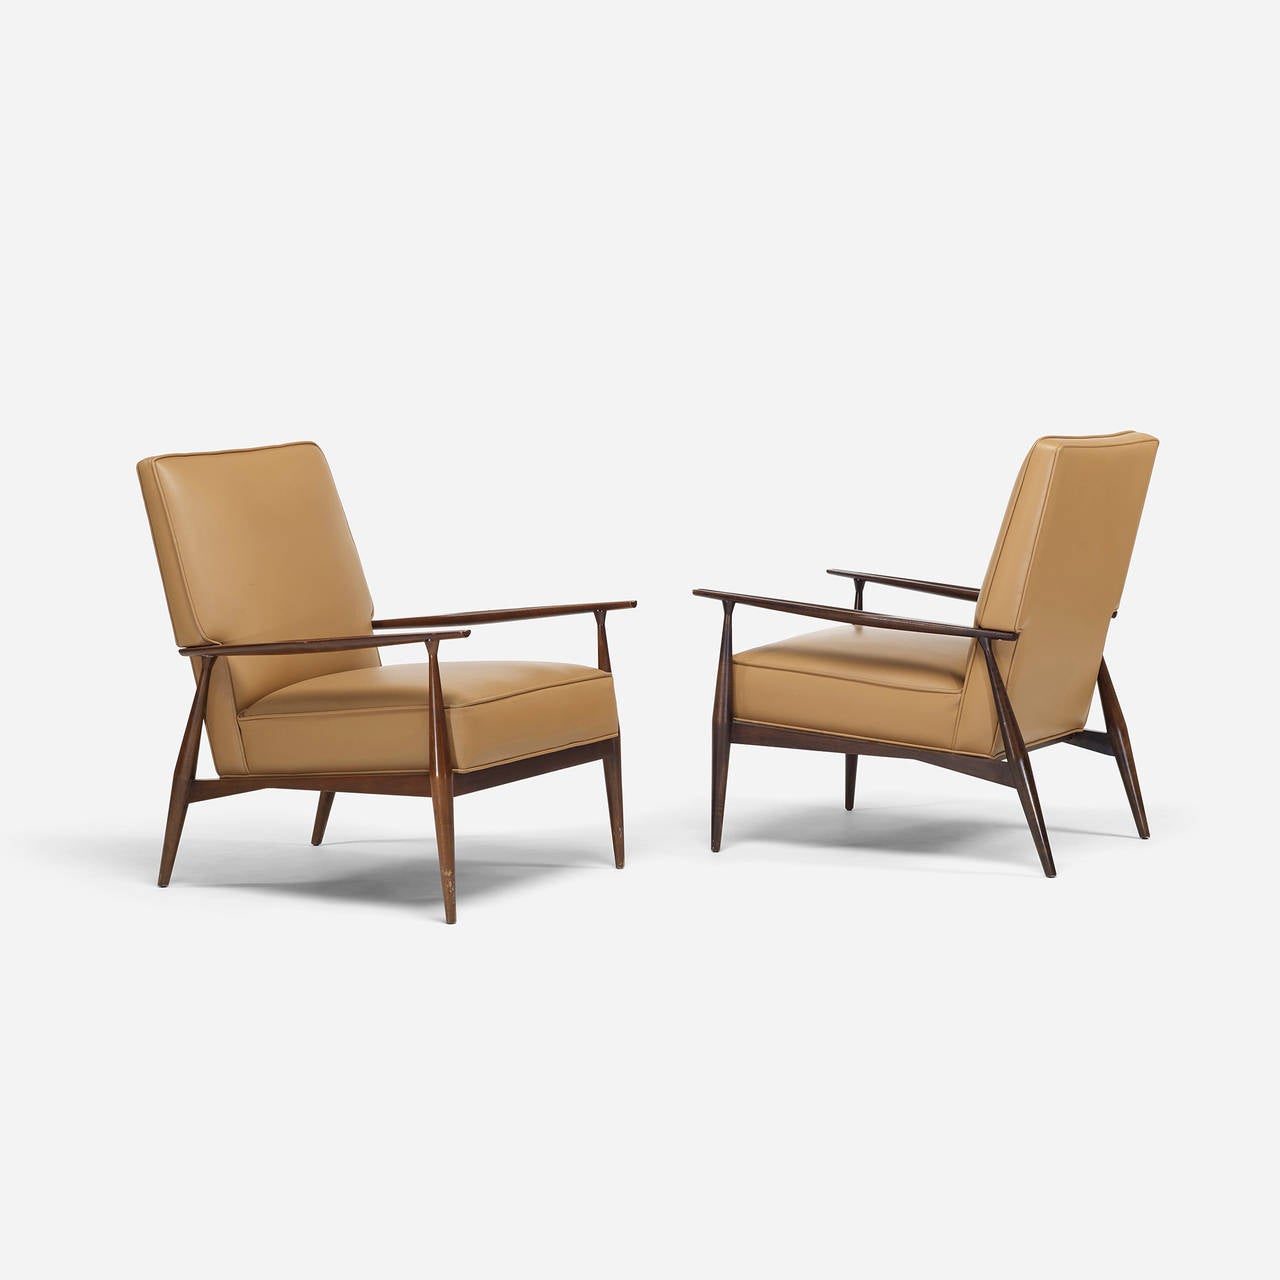 American Pair of Lounge Chairs by Paul McCobb for Directional